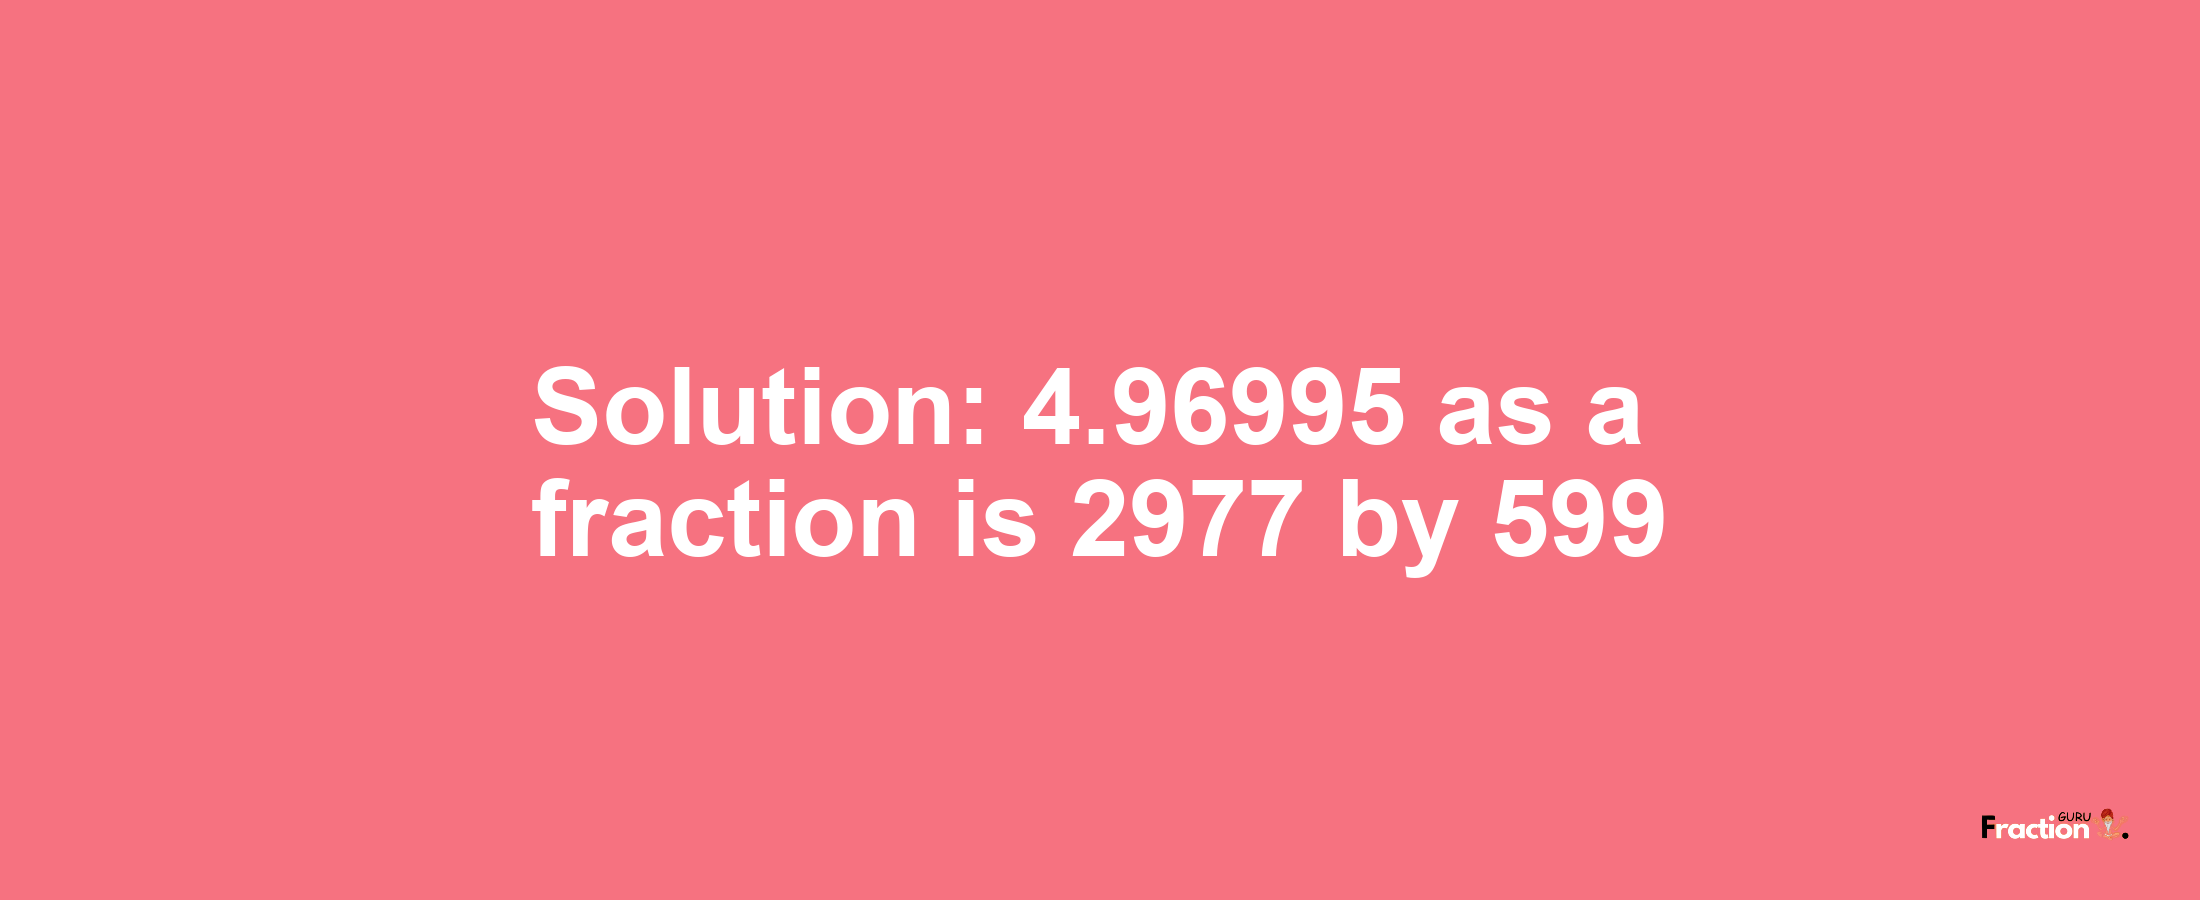 Solution:4.96995 as a fraction is 2977/599